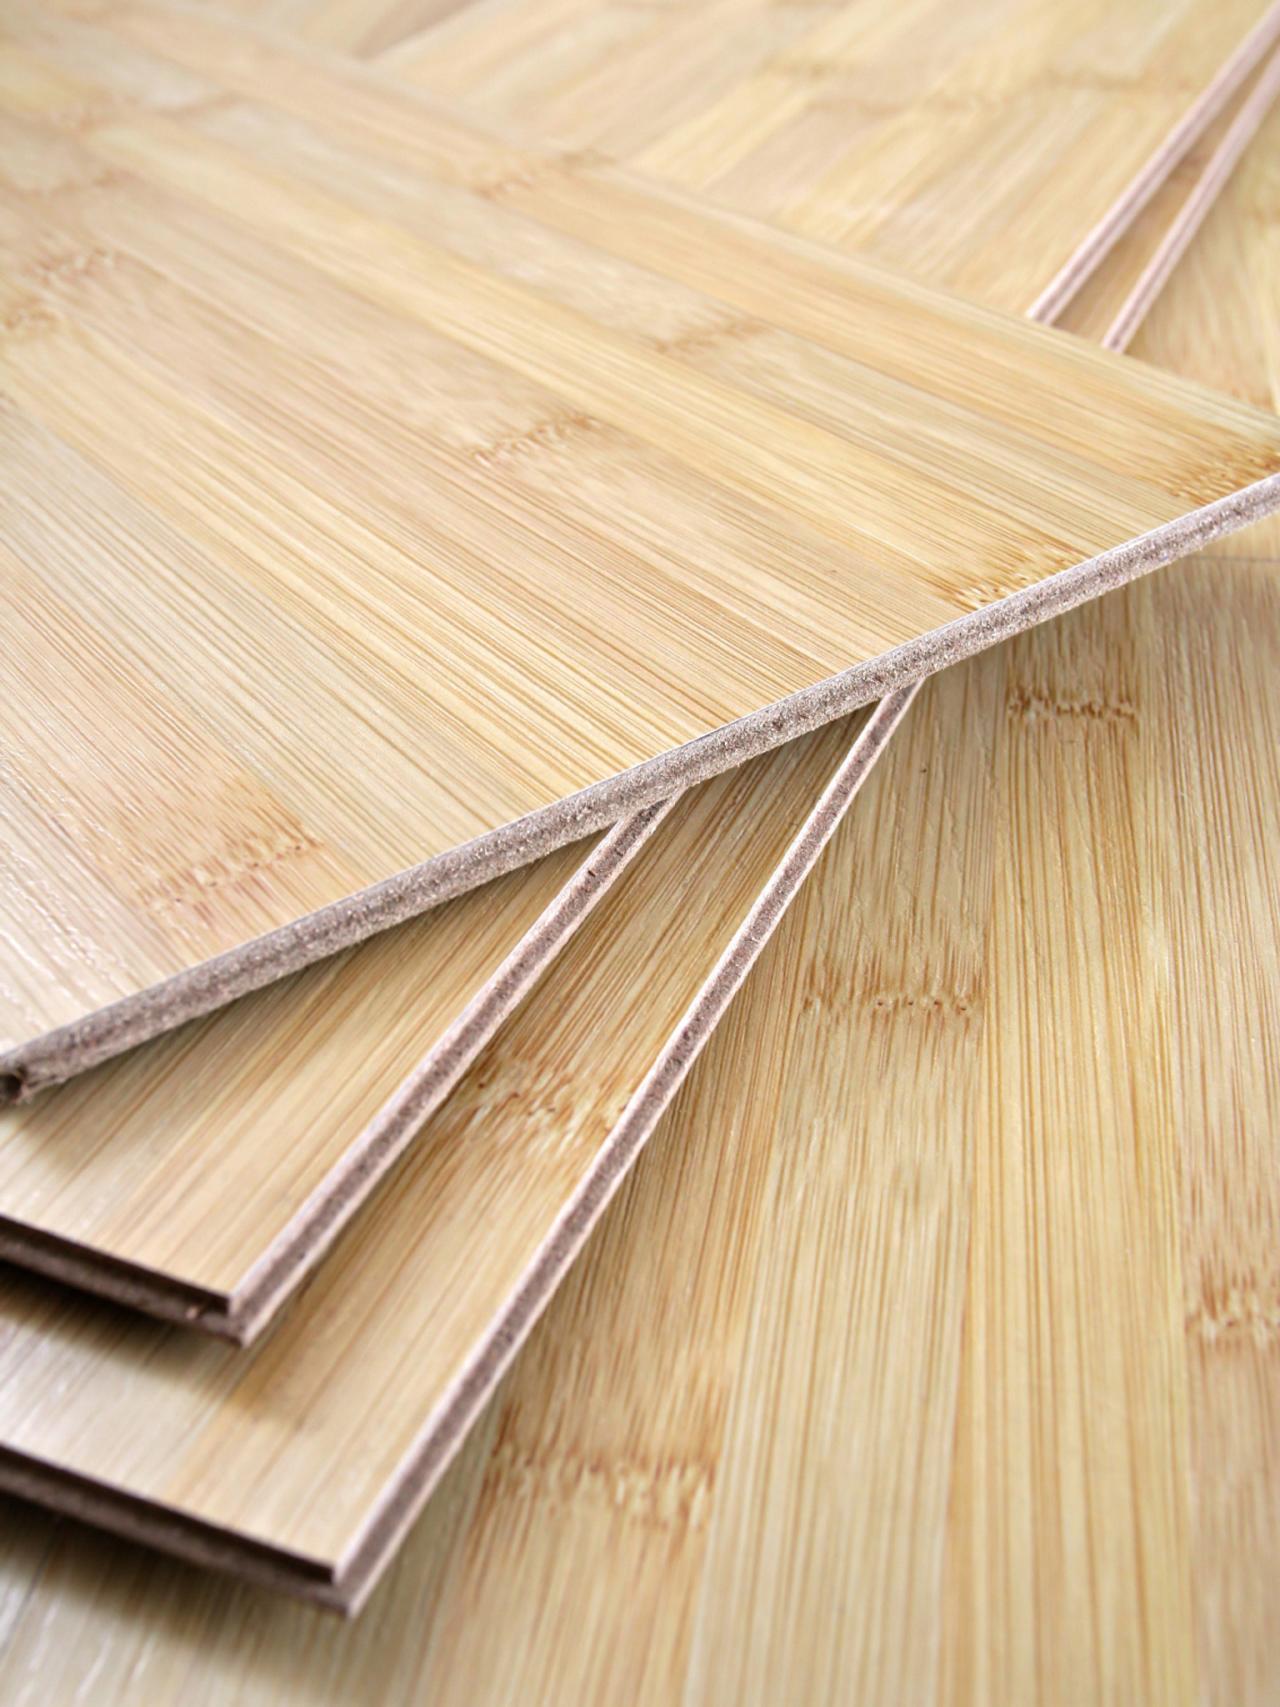 The Pros And Cons Of Bamboo Flooring Diy, Is Bamboo Or Laminate Flooring Better